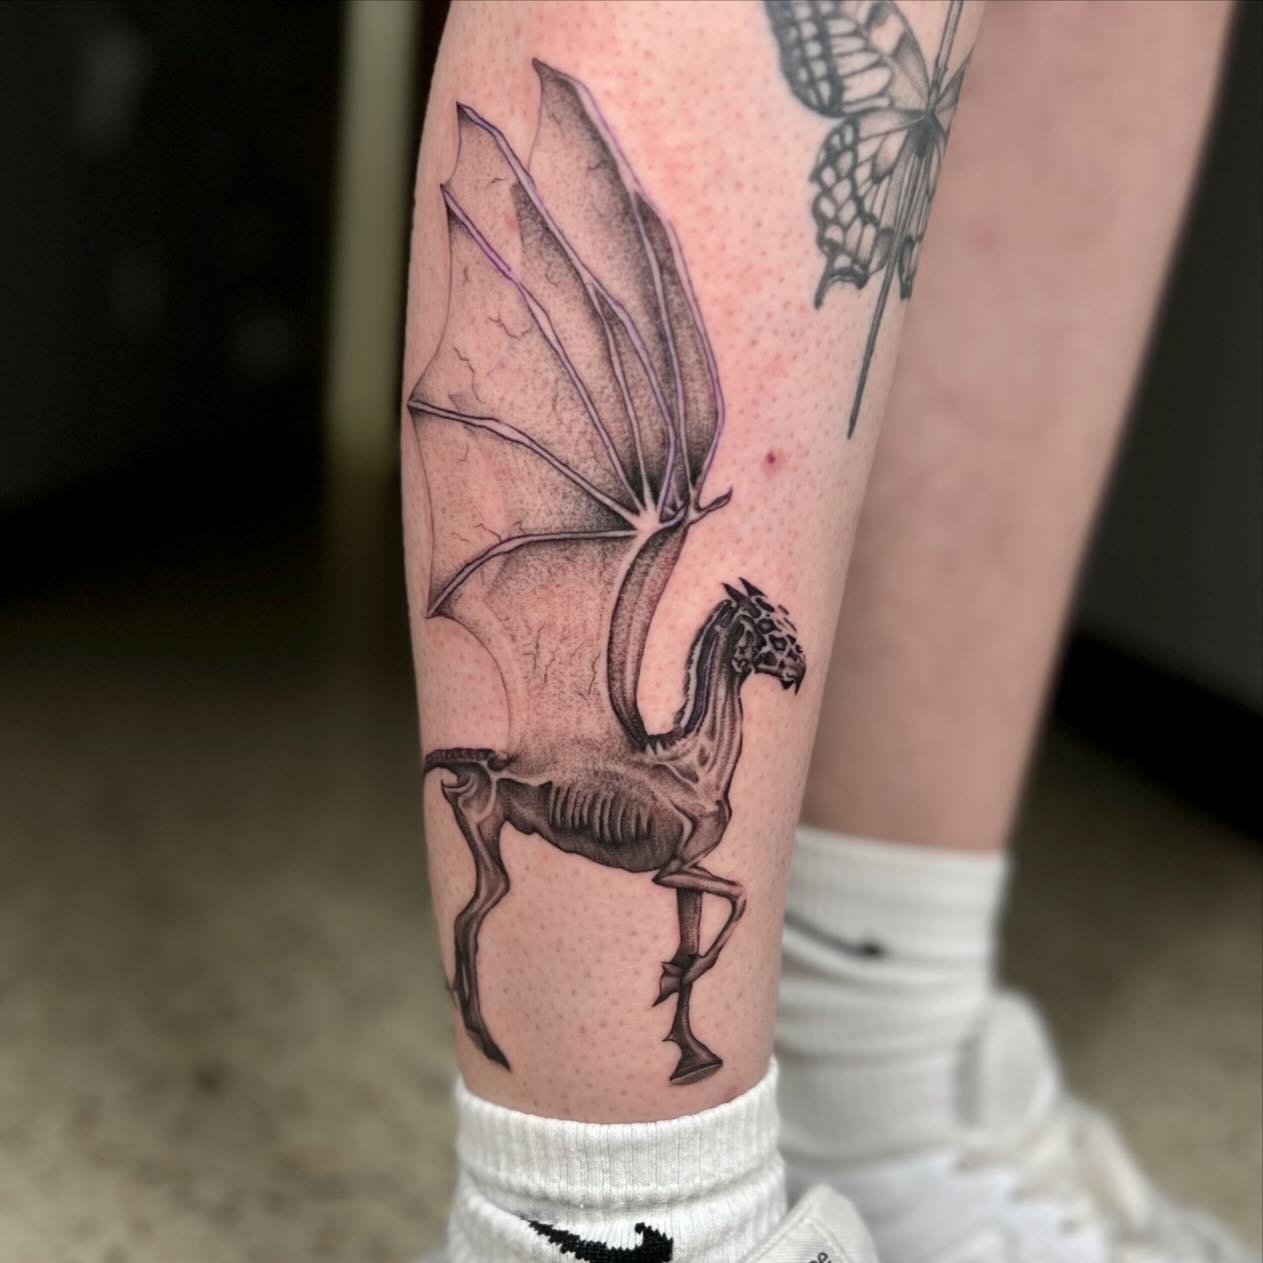 &ldquo;I loved the dark shading mixed with the light shading in the wings - I had fun doing it!&rdquo; - Sam 🌟

🦋 Join us in honoring Sam&rsquo;s tattoo journey as she marks one year with us at Motor City Tattoo Studio. 

Her passion and growth sho